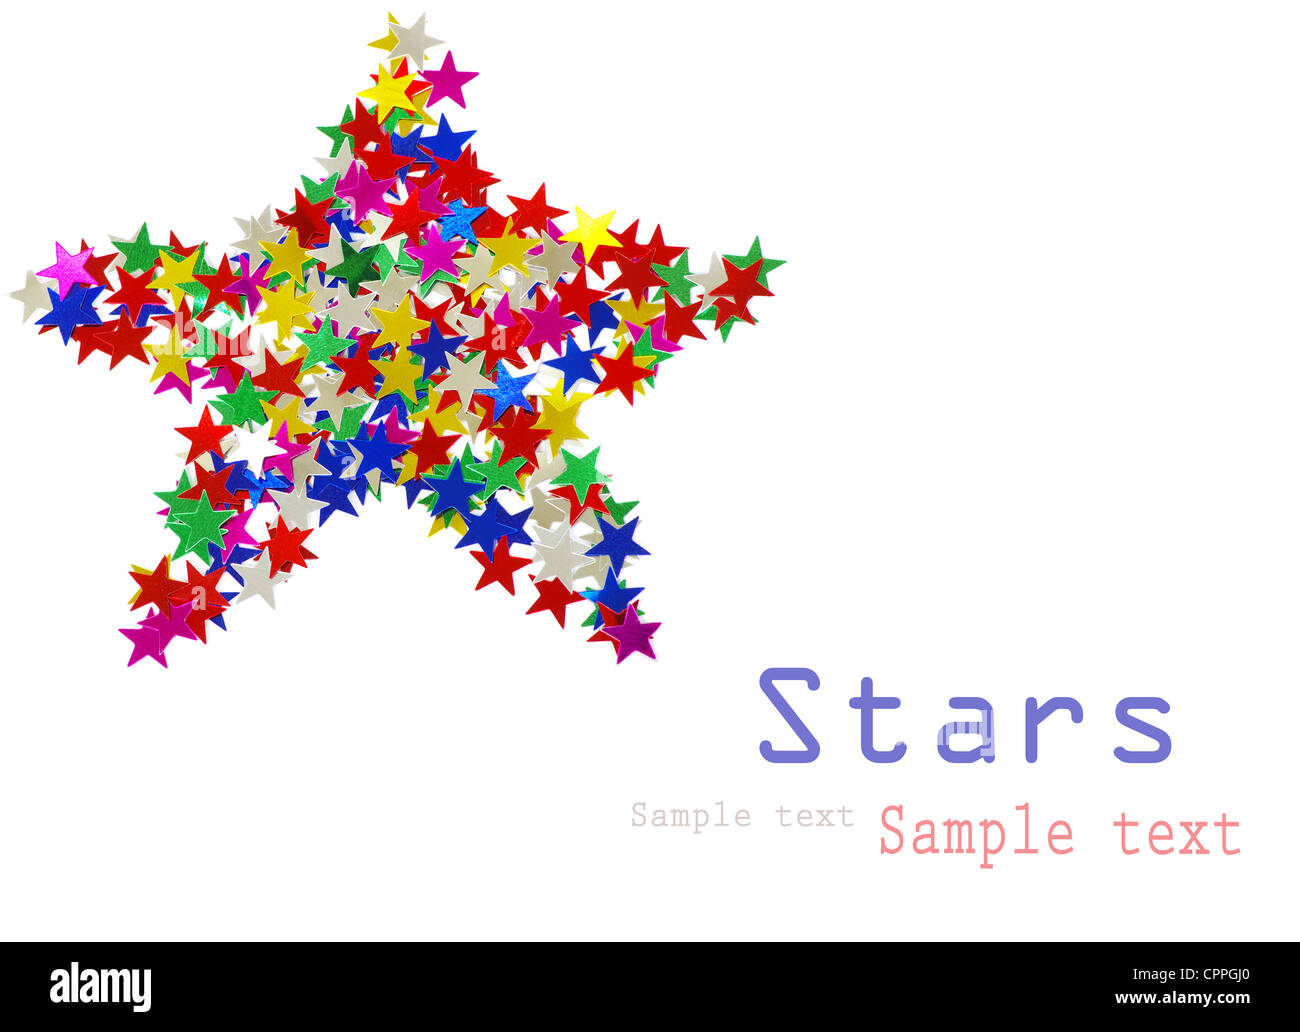 Big star composed of many colored stars on white Stock Photo